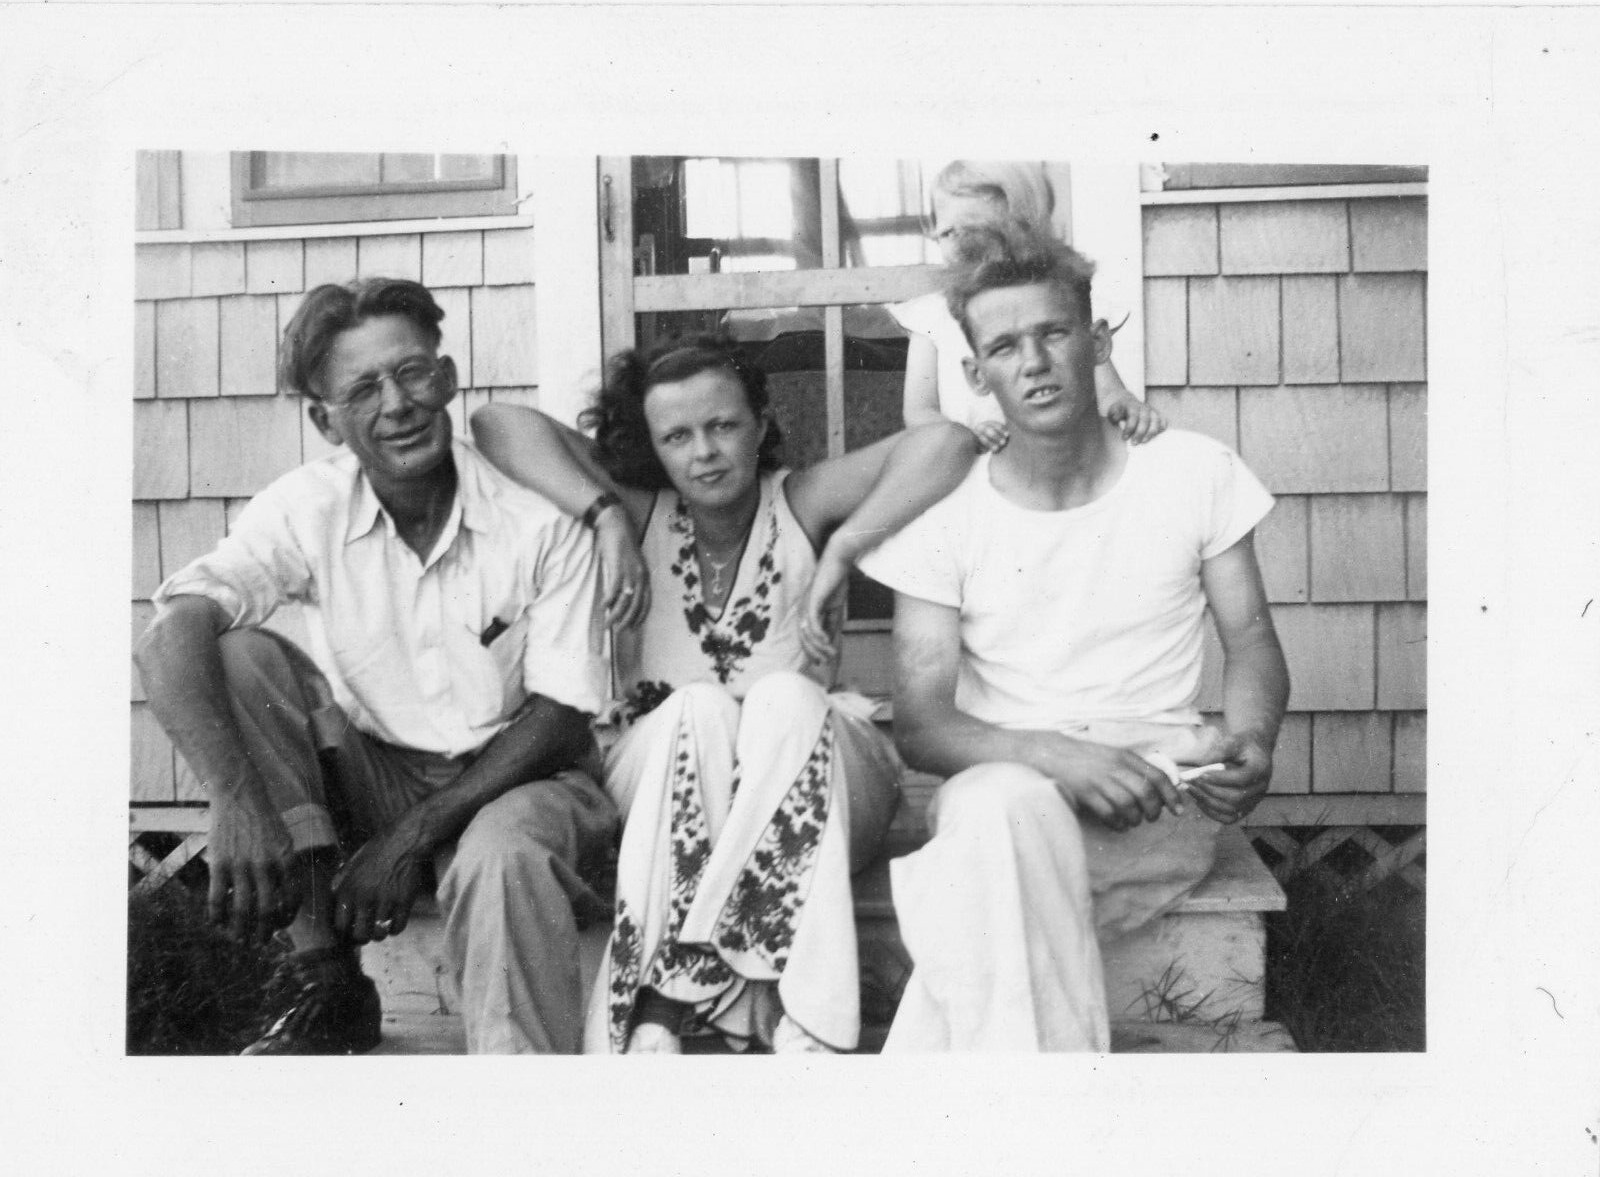 Found Photo Young Woman Handsome Men Classic American Friends Vintage Original